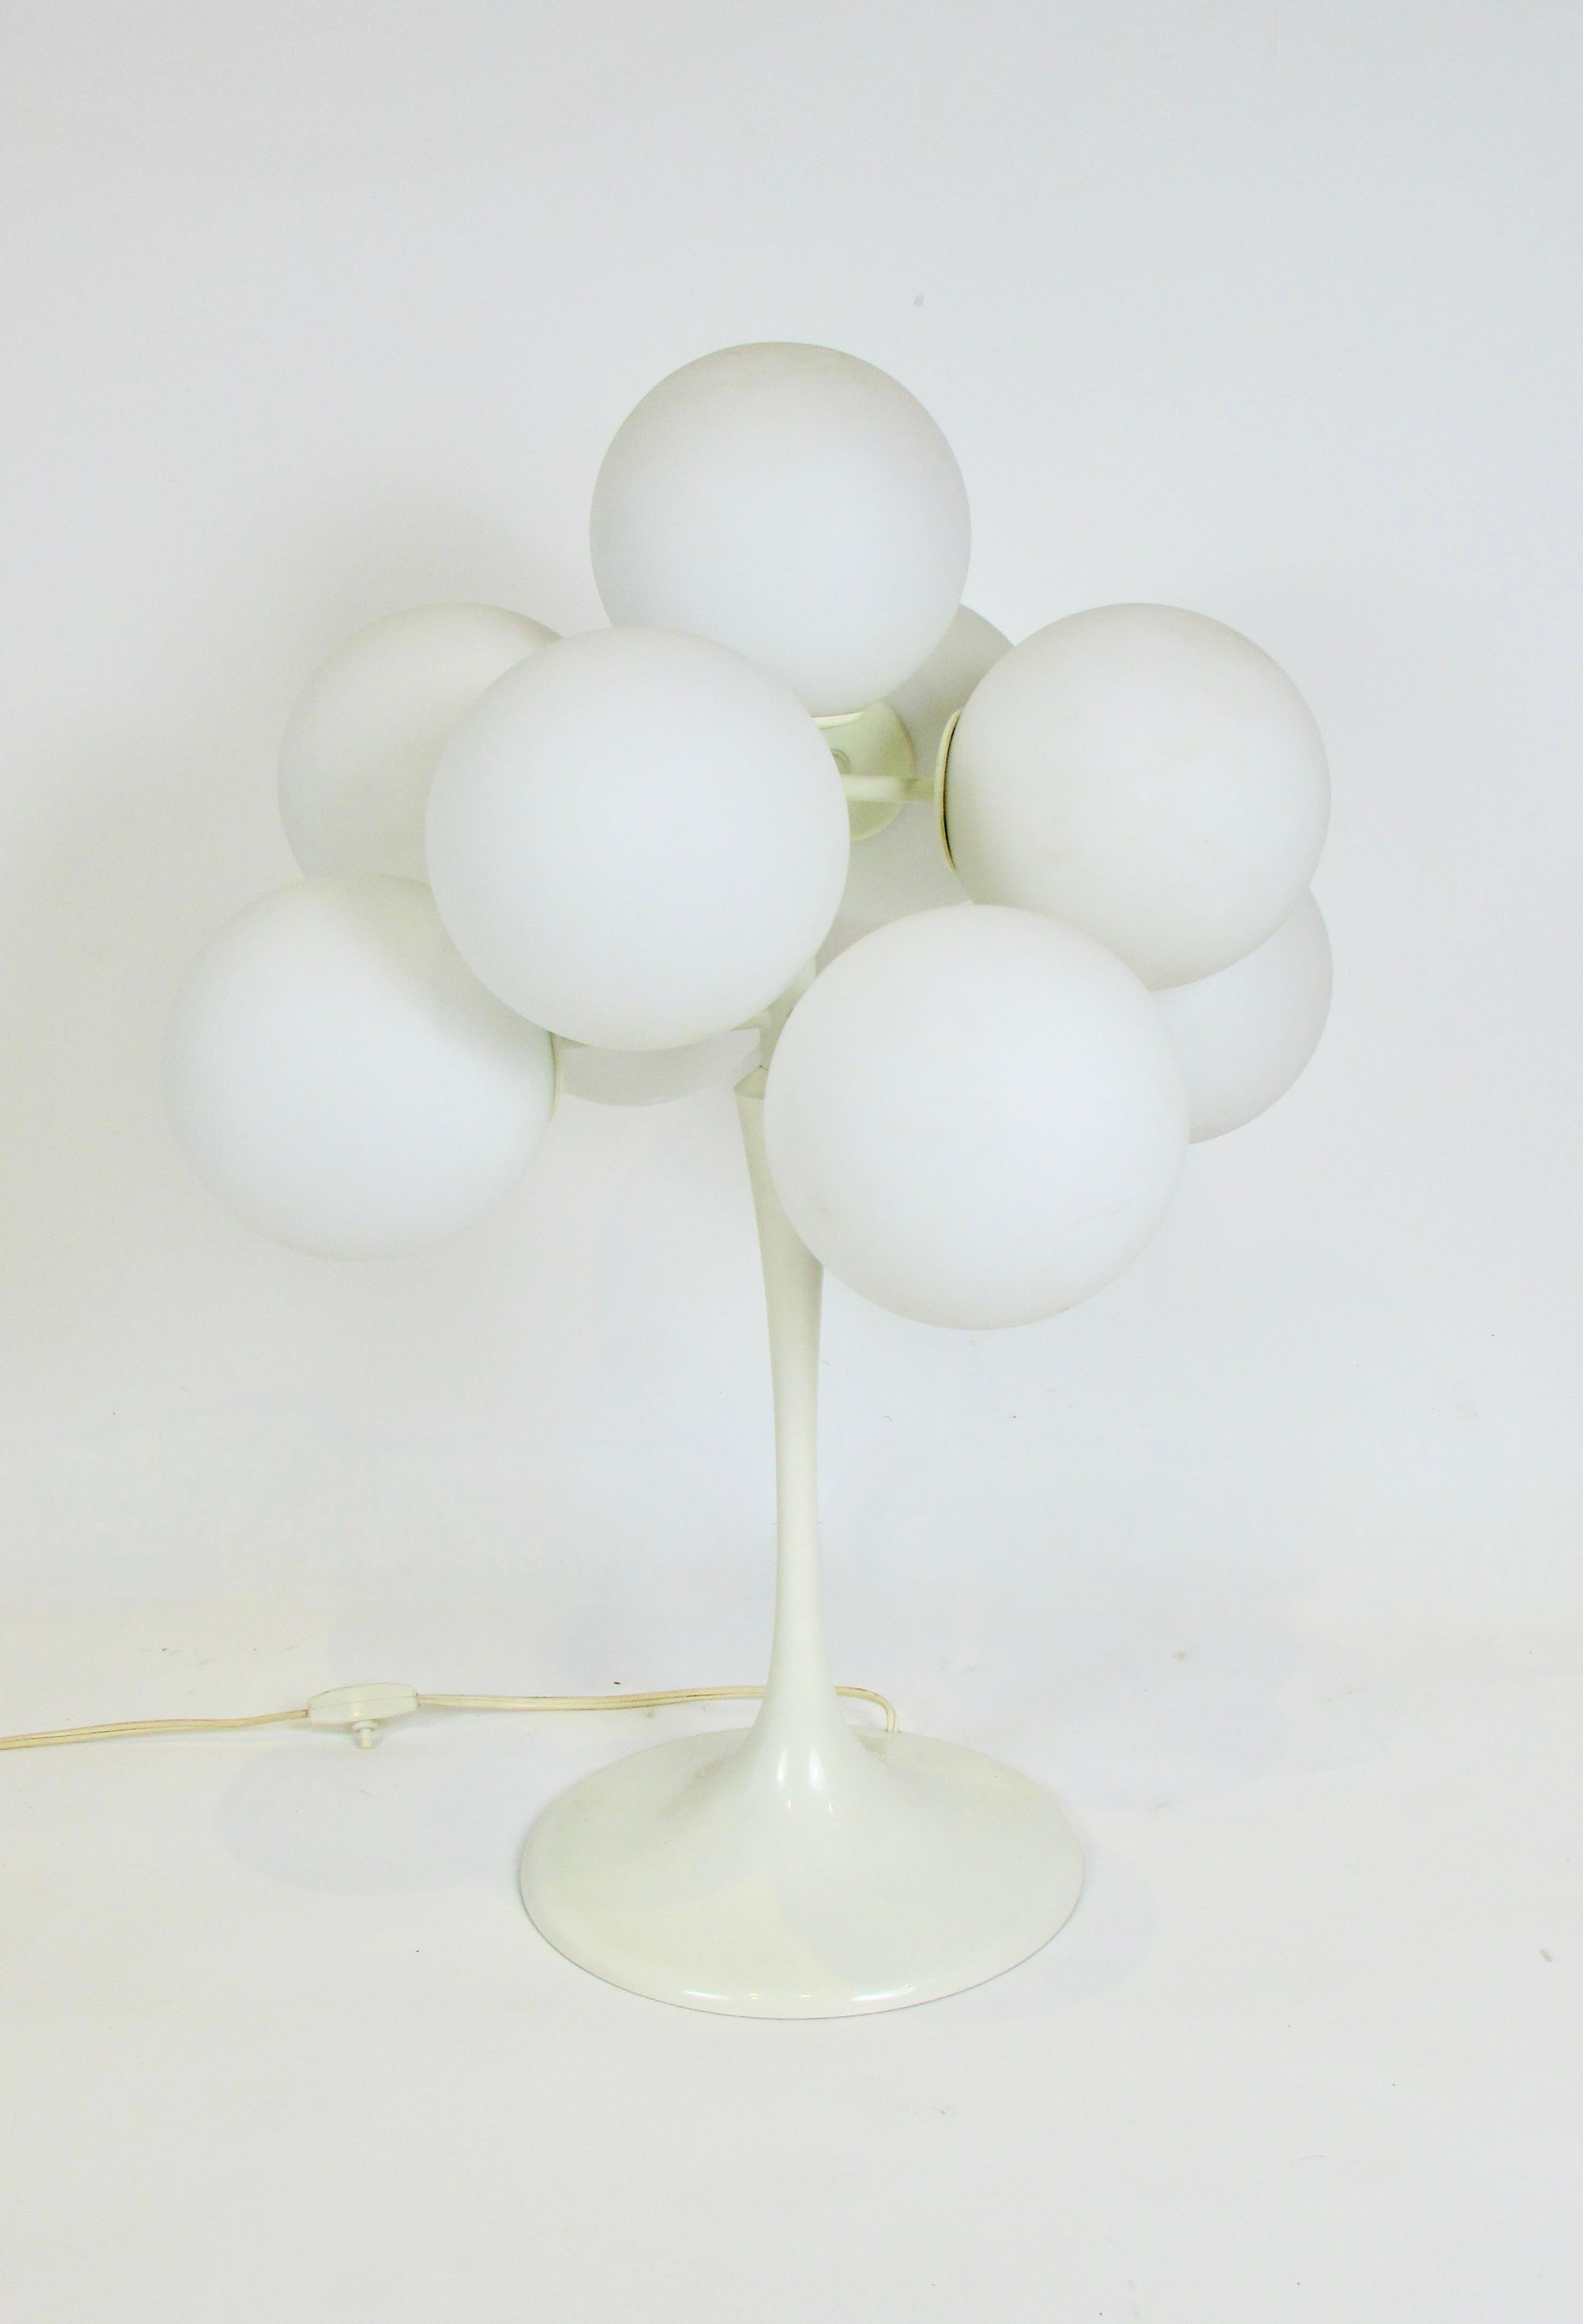 Architect Max Bill designed lamp produced by BAG Turgi Switzerland . White enameled base holds nine frosted white glass round ball globes . Emits nice warm comforting glow when lit . 